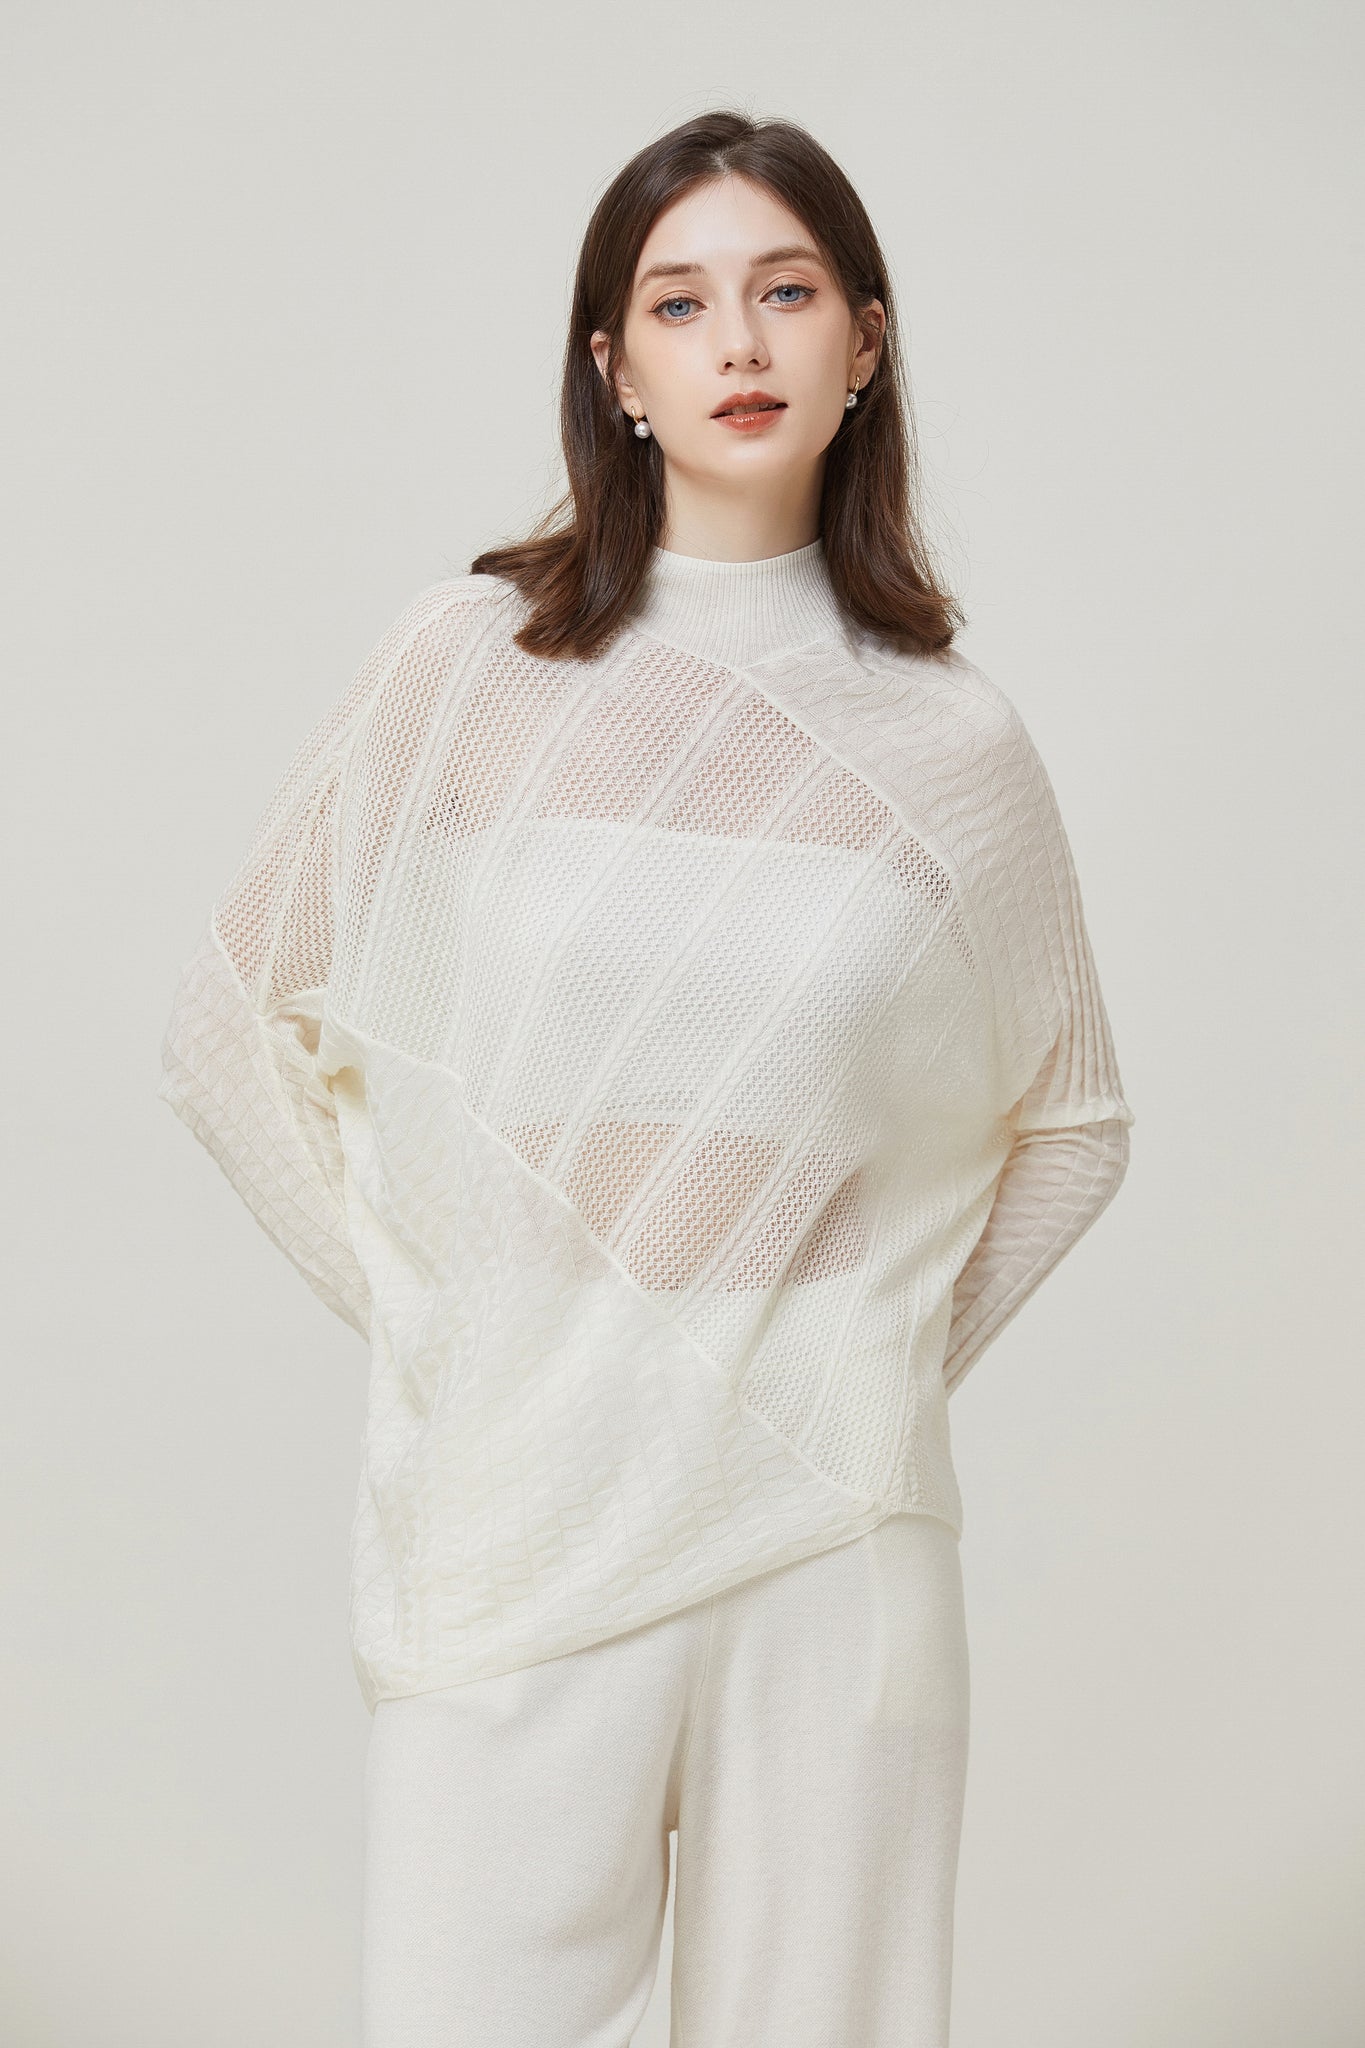 Sylphide | Lille White Semi-Sheer Wool Top